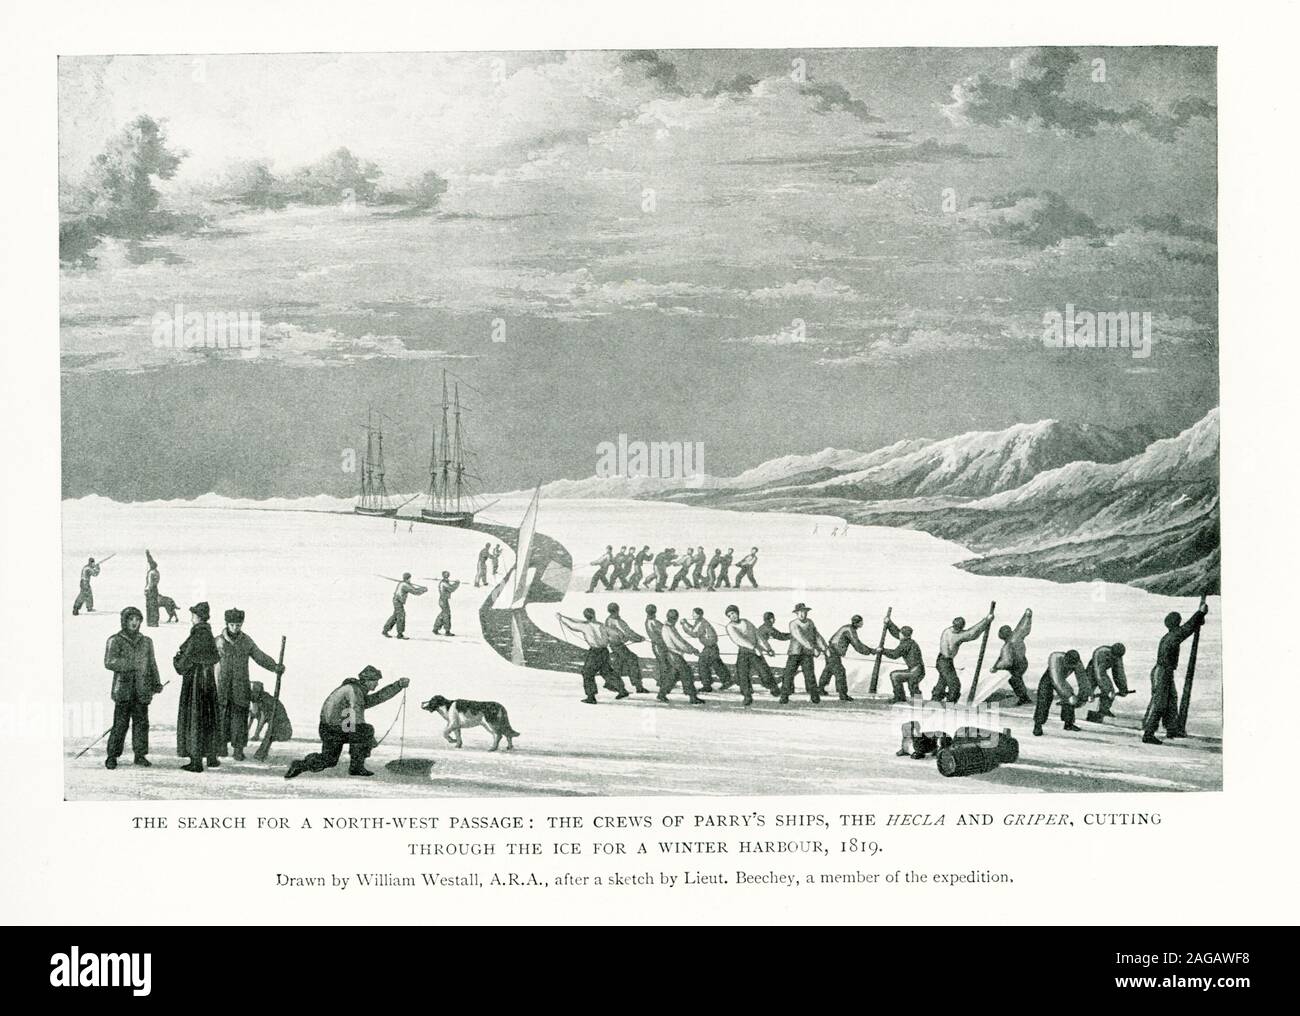 This illustration dates to 1912 and the caption reads: The Search for a North-west Passage: the Crews of Parry’s Ships, the Hecla and Griper, Cutting Through the Ice for a Winter Harbour, 1819. Drawn by William Westall, A.R.A., after a sketch by Lieut. Beechey, a member of the expedition. Parry was an English explorer of the Arctic who was known for his 1819 expedition through the Parry Channel, probably the most successful in the long quest for the Northwest Passage. In 1827 he attempted one of the earliest expeditions to the North Pole. Stock Photo